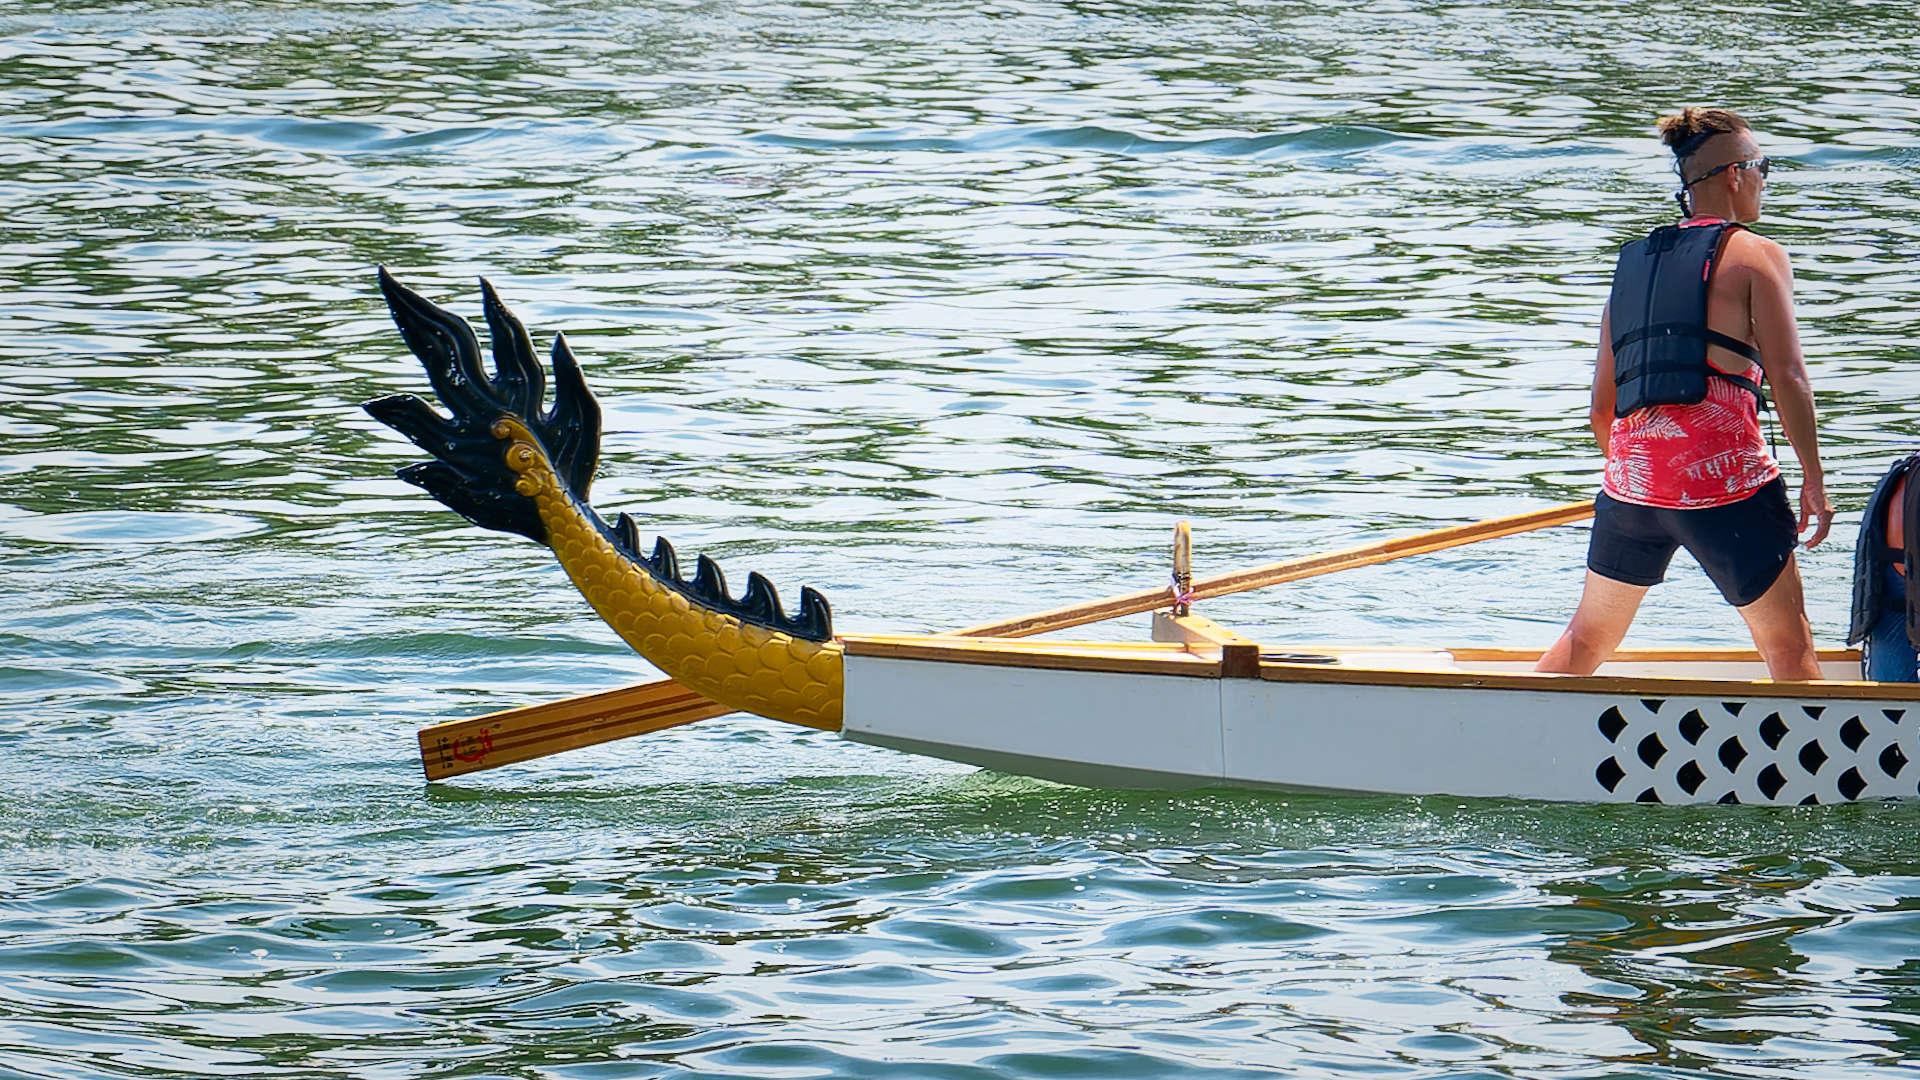 A steerer standing near the back of a dragon boat. The very end of the boat is decorated with a dragon tail.